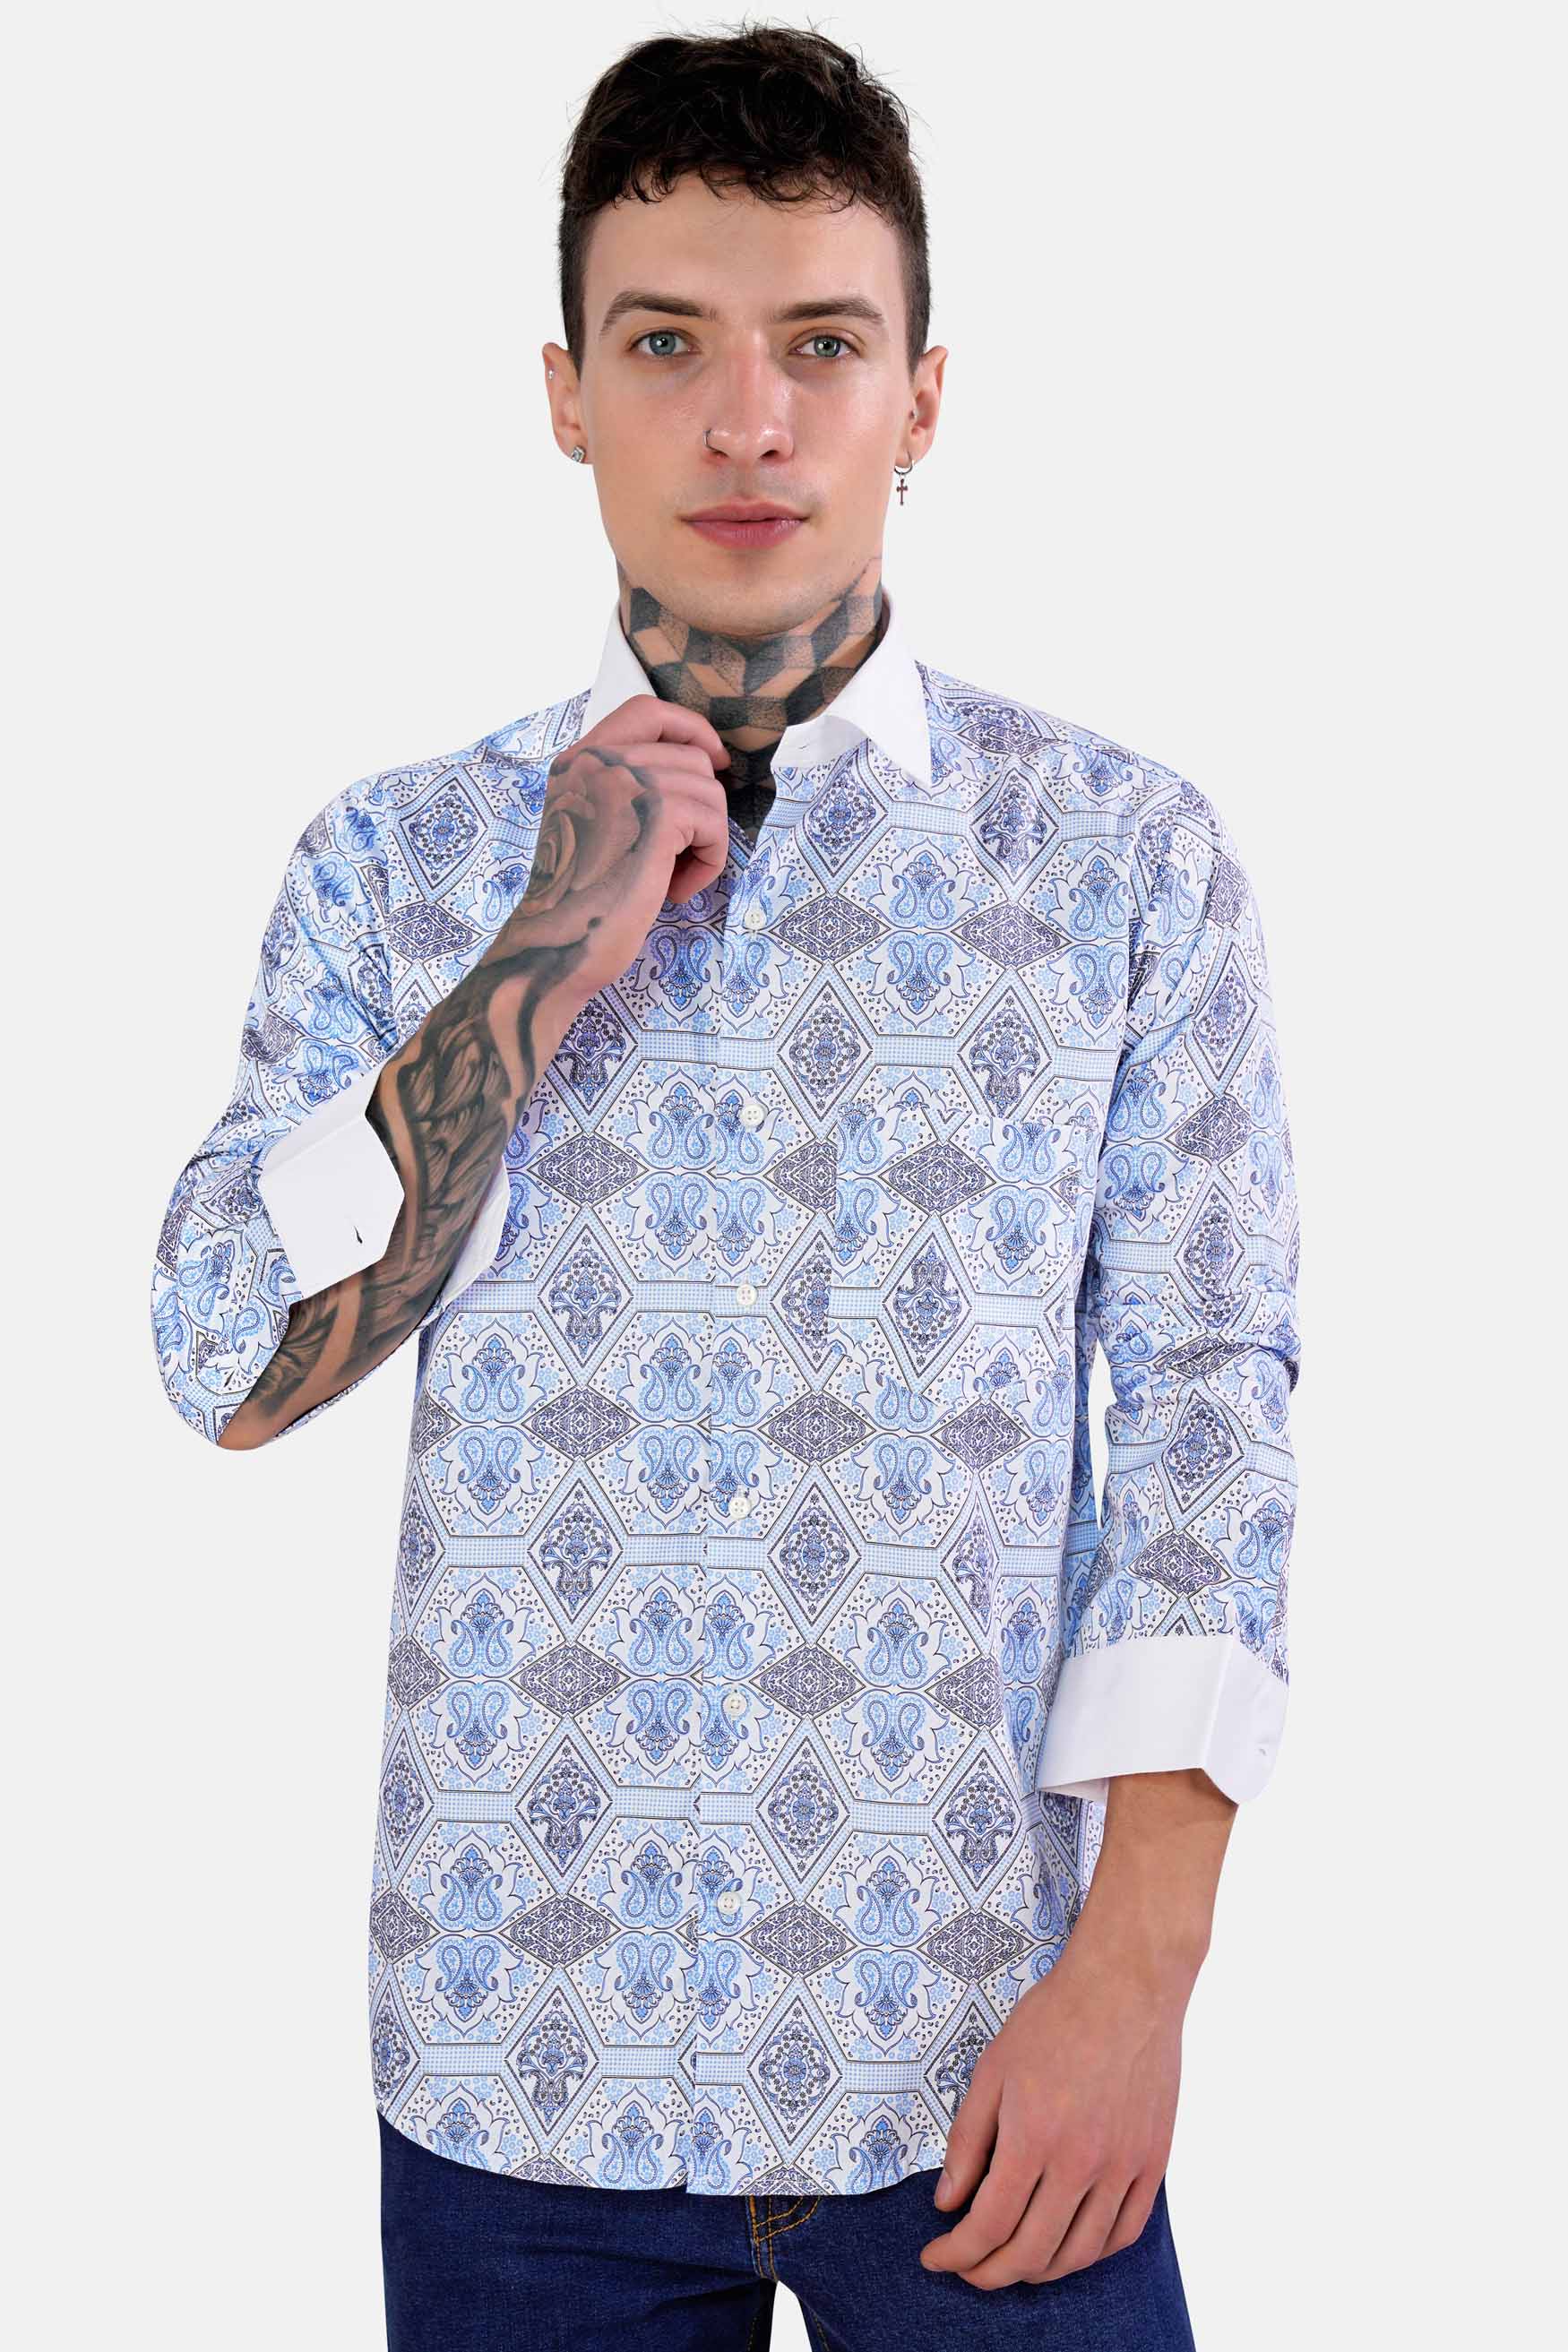 Tufts Blue Ethnic Printed with White Cuffs and Collar Subtle Sheen Super Soft Premium Cotton Shirt